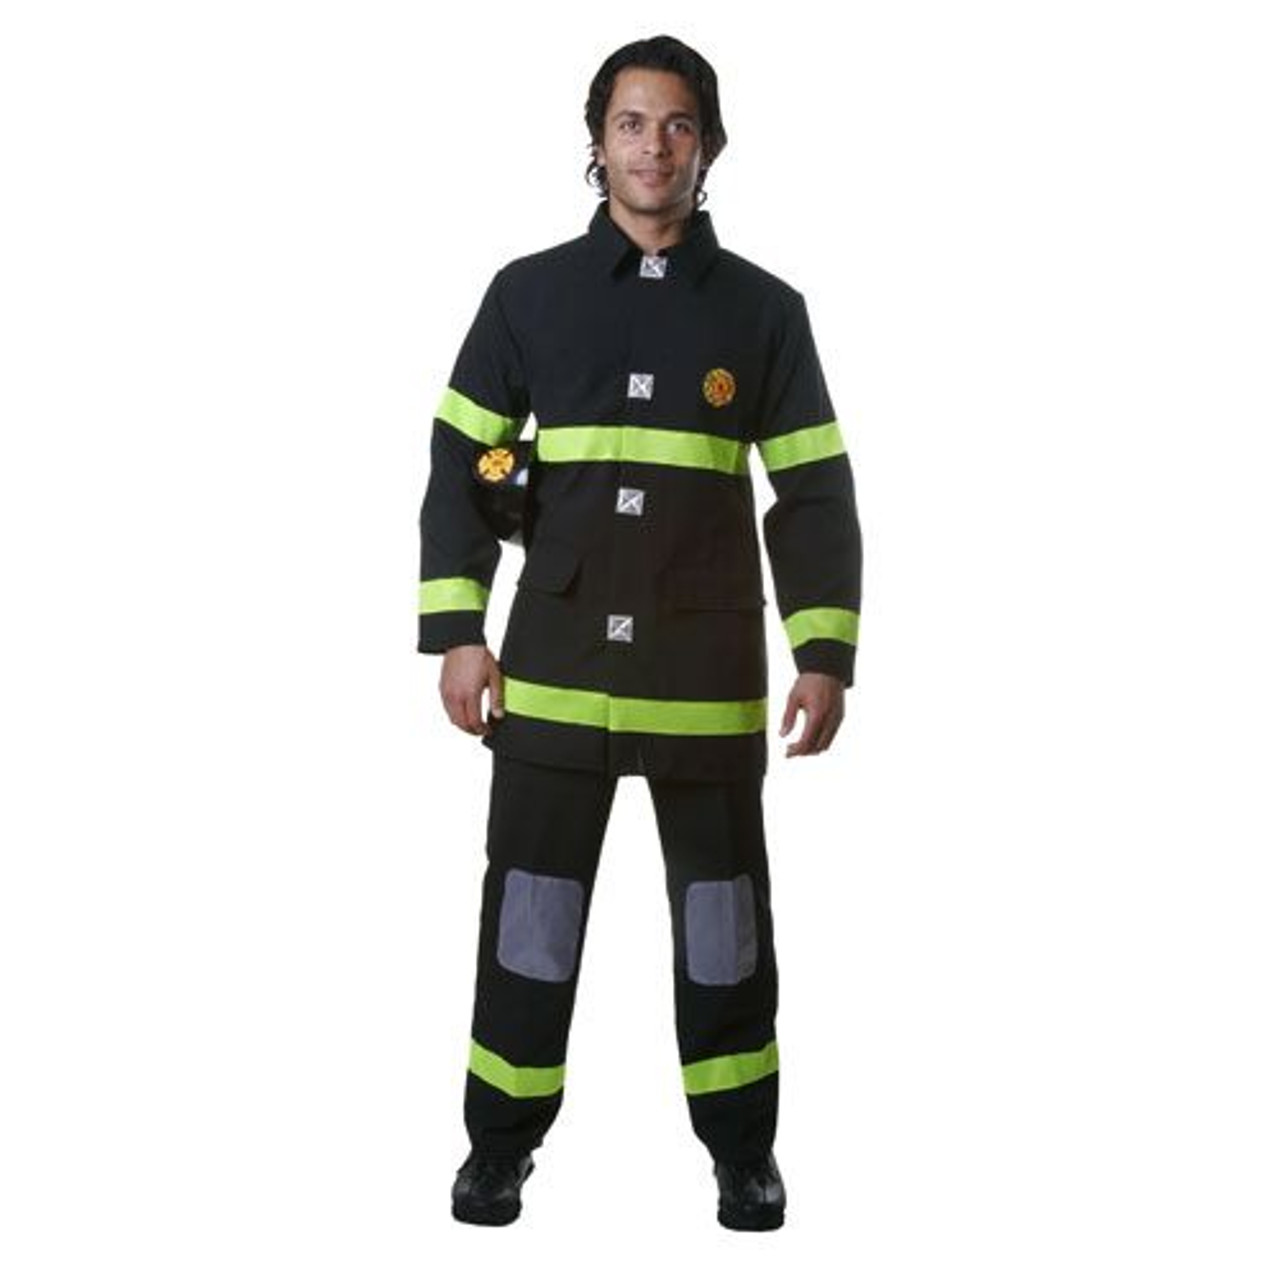 Adult Fire Fighter Costume - Black